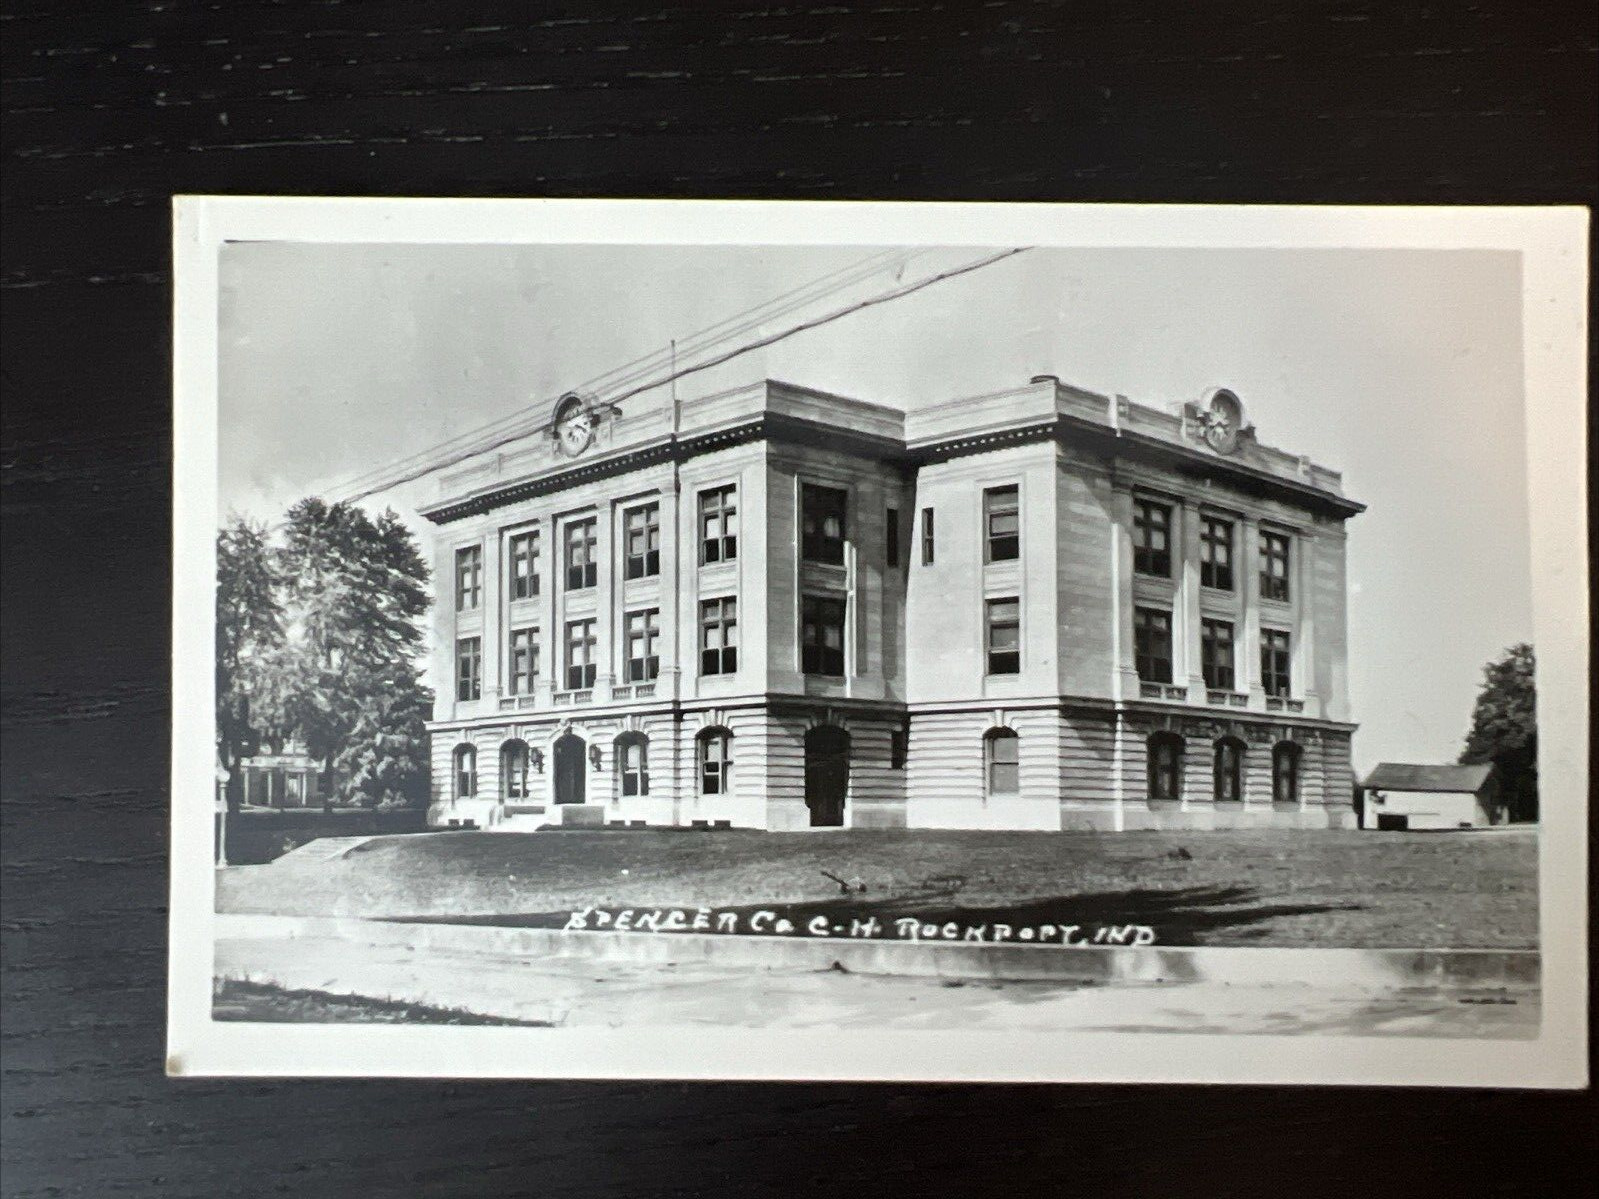 Vtg Postcard RPPC Rockport Indiana IN Spencer County Courthouse